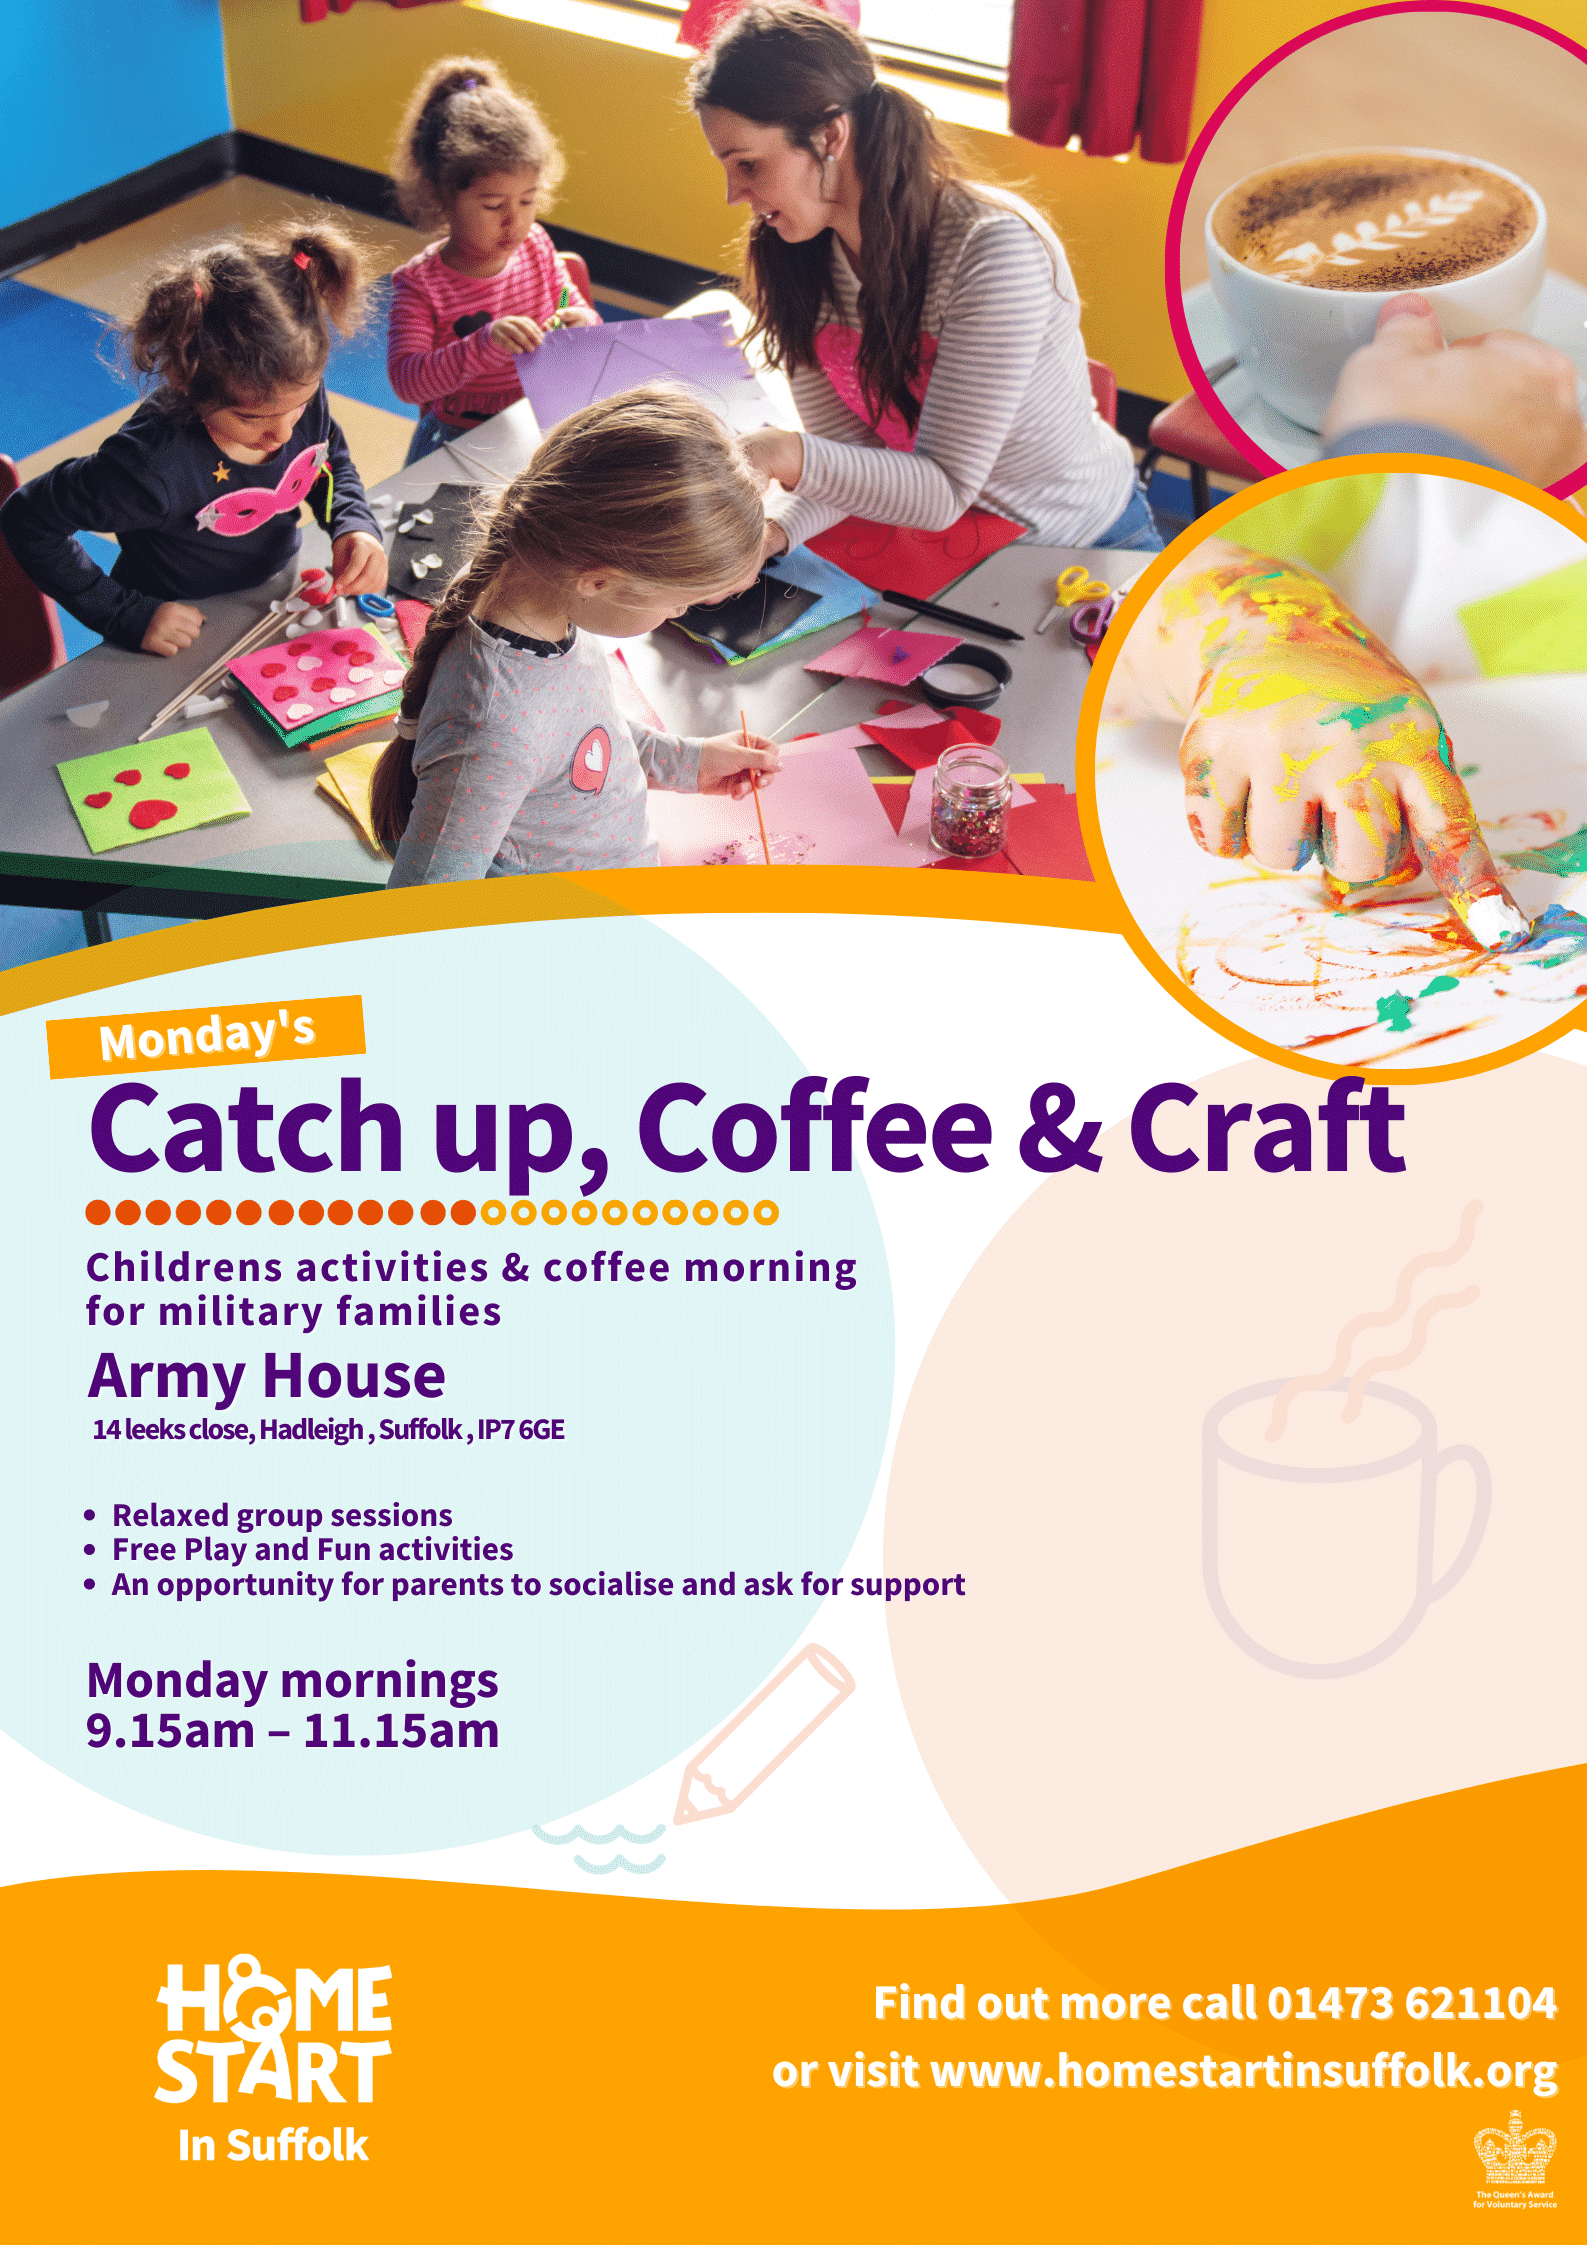 Catch up coffee and craft hadleigh